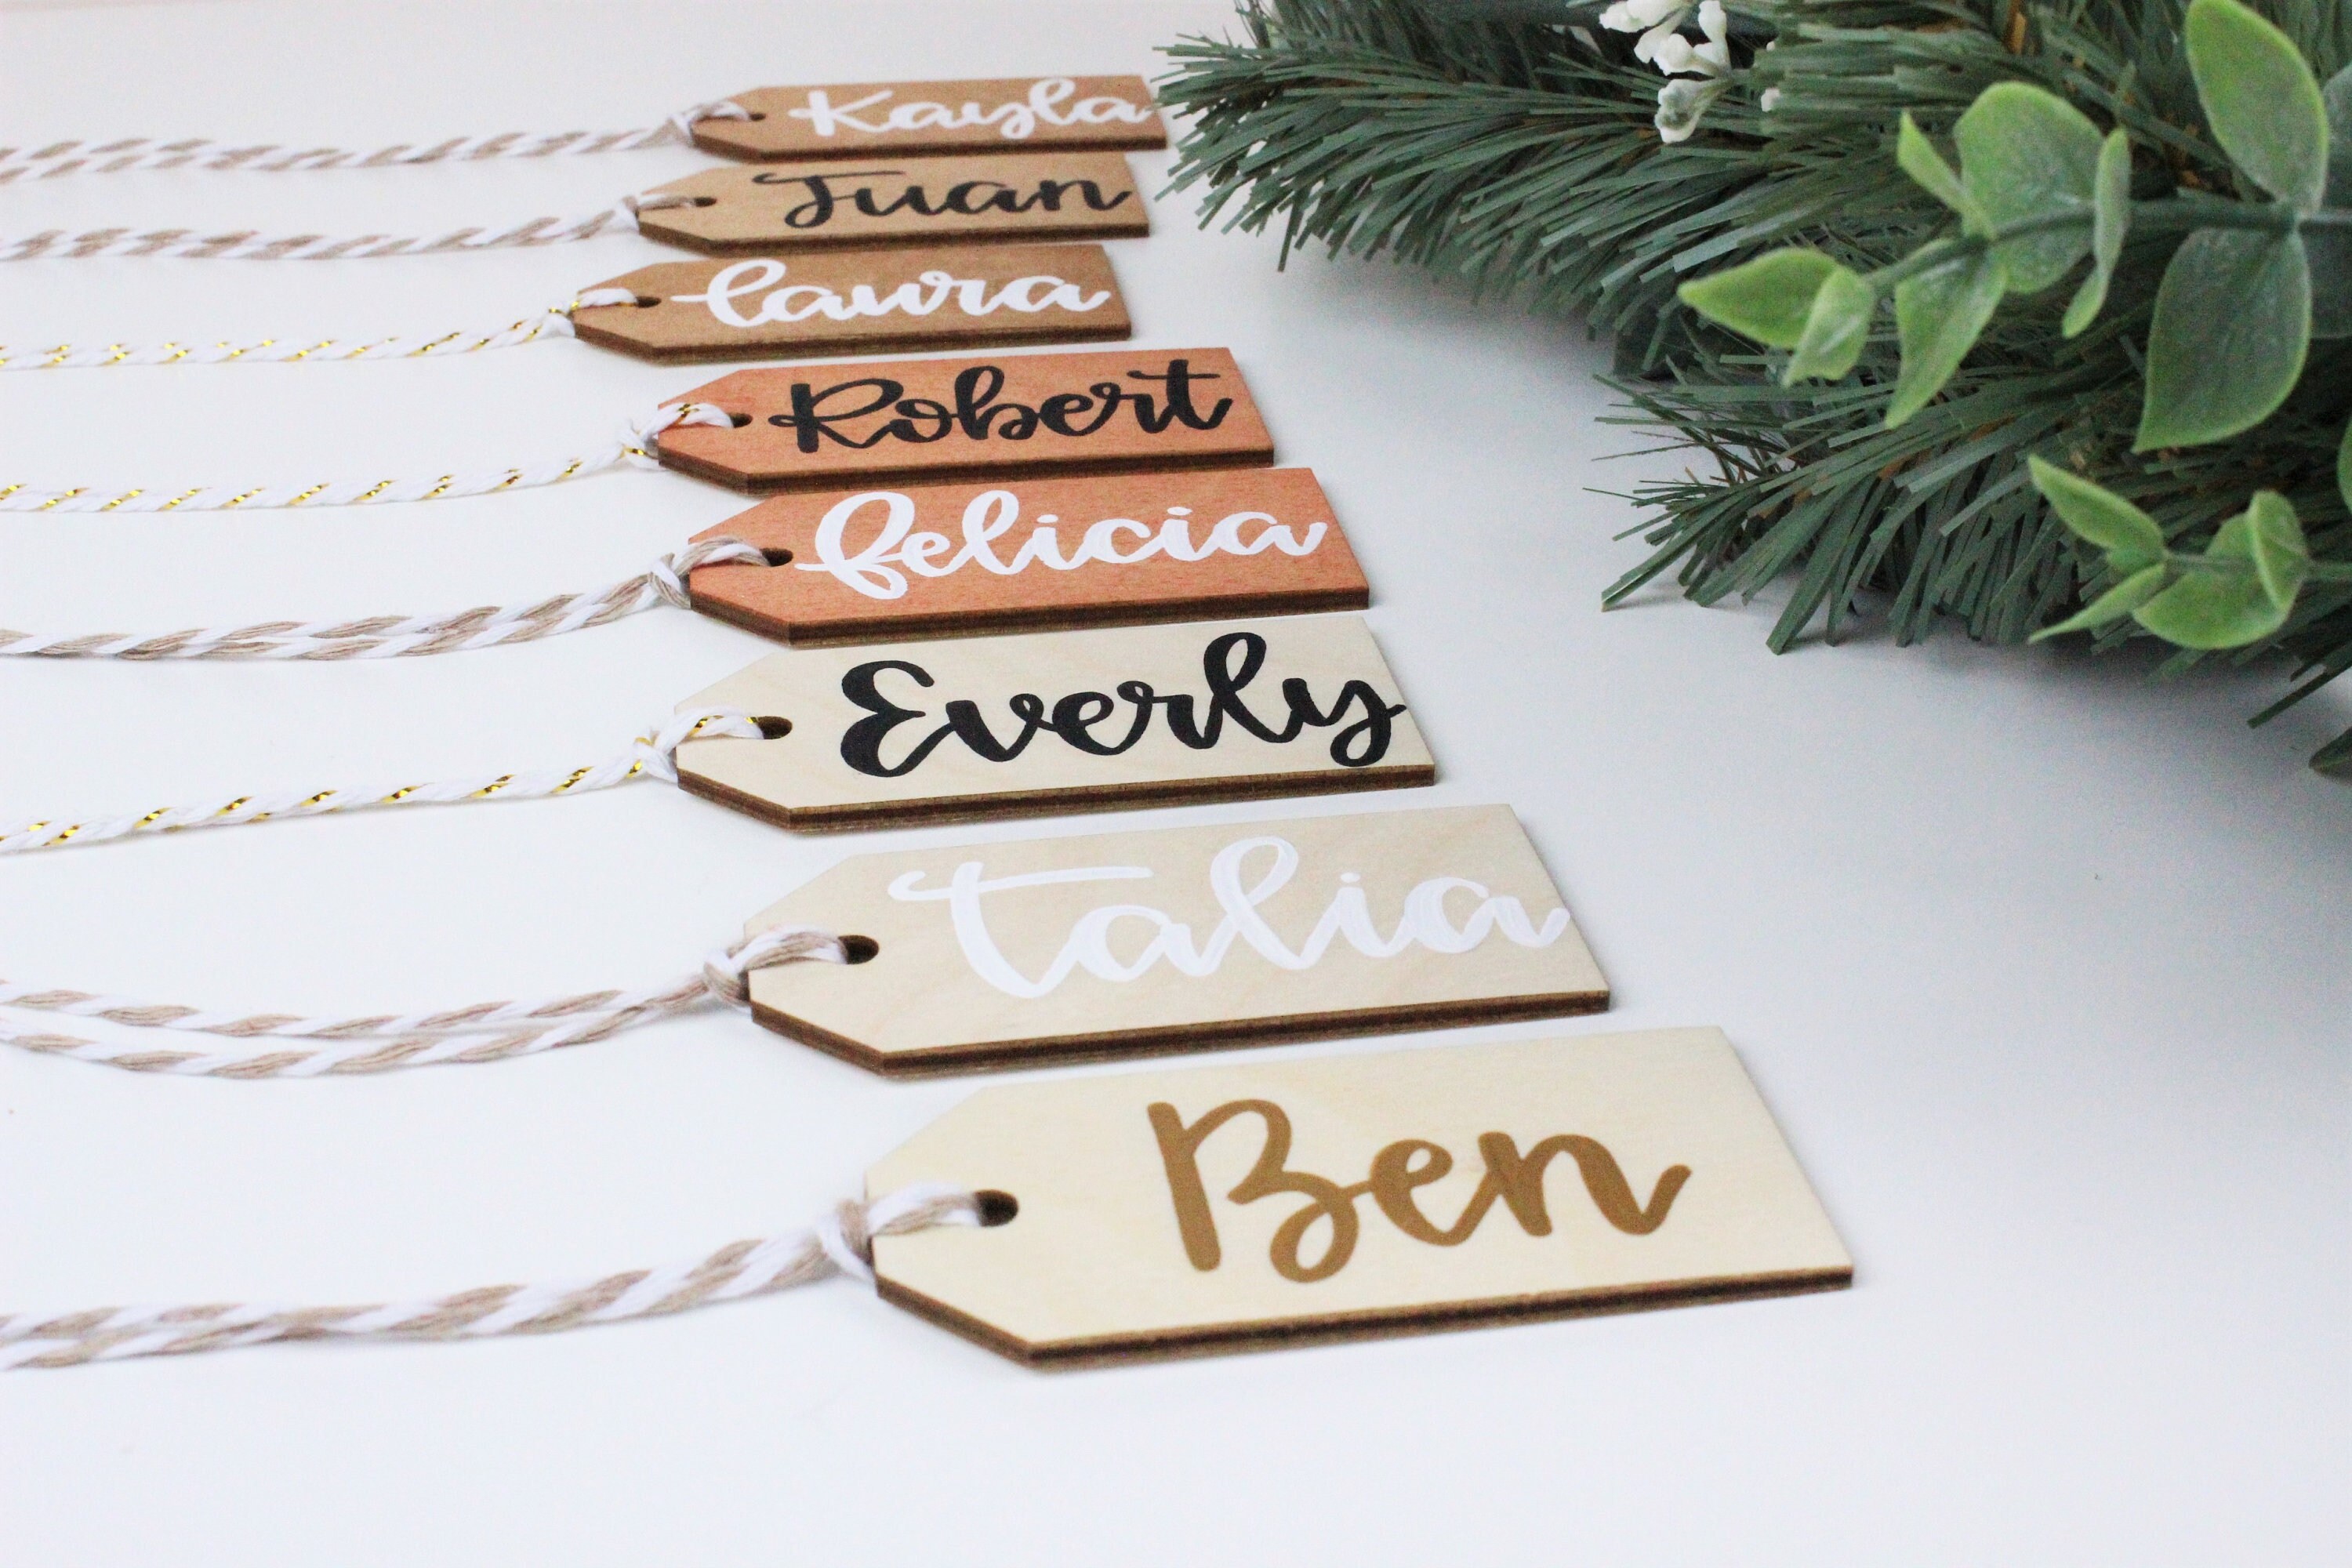 Christmas Gift Tags With String, Christmas Name Tags, Personalized Christmas  Tags, Christmas Present Tags, Twine Included 